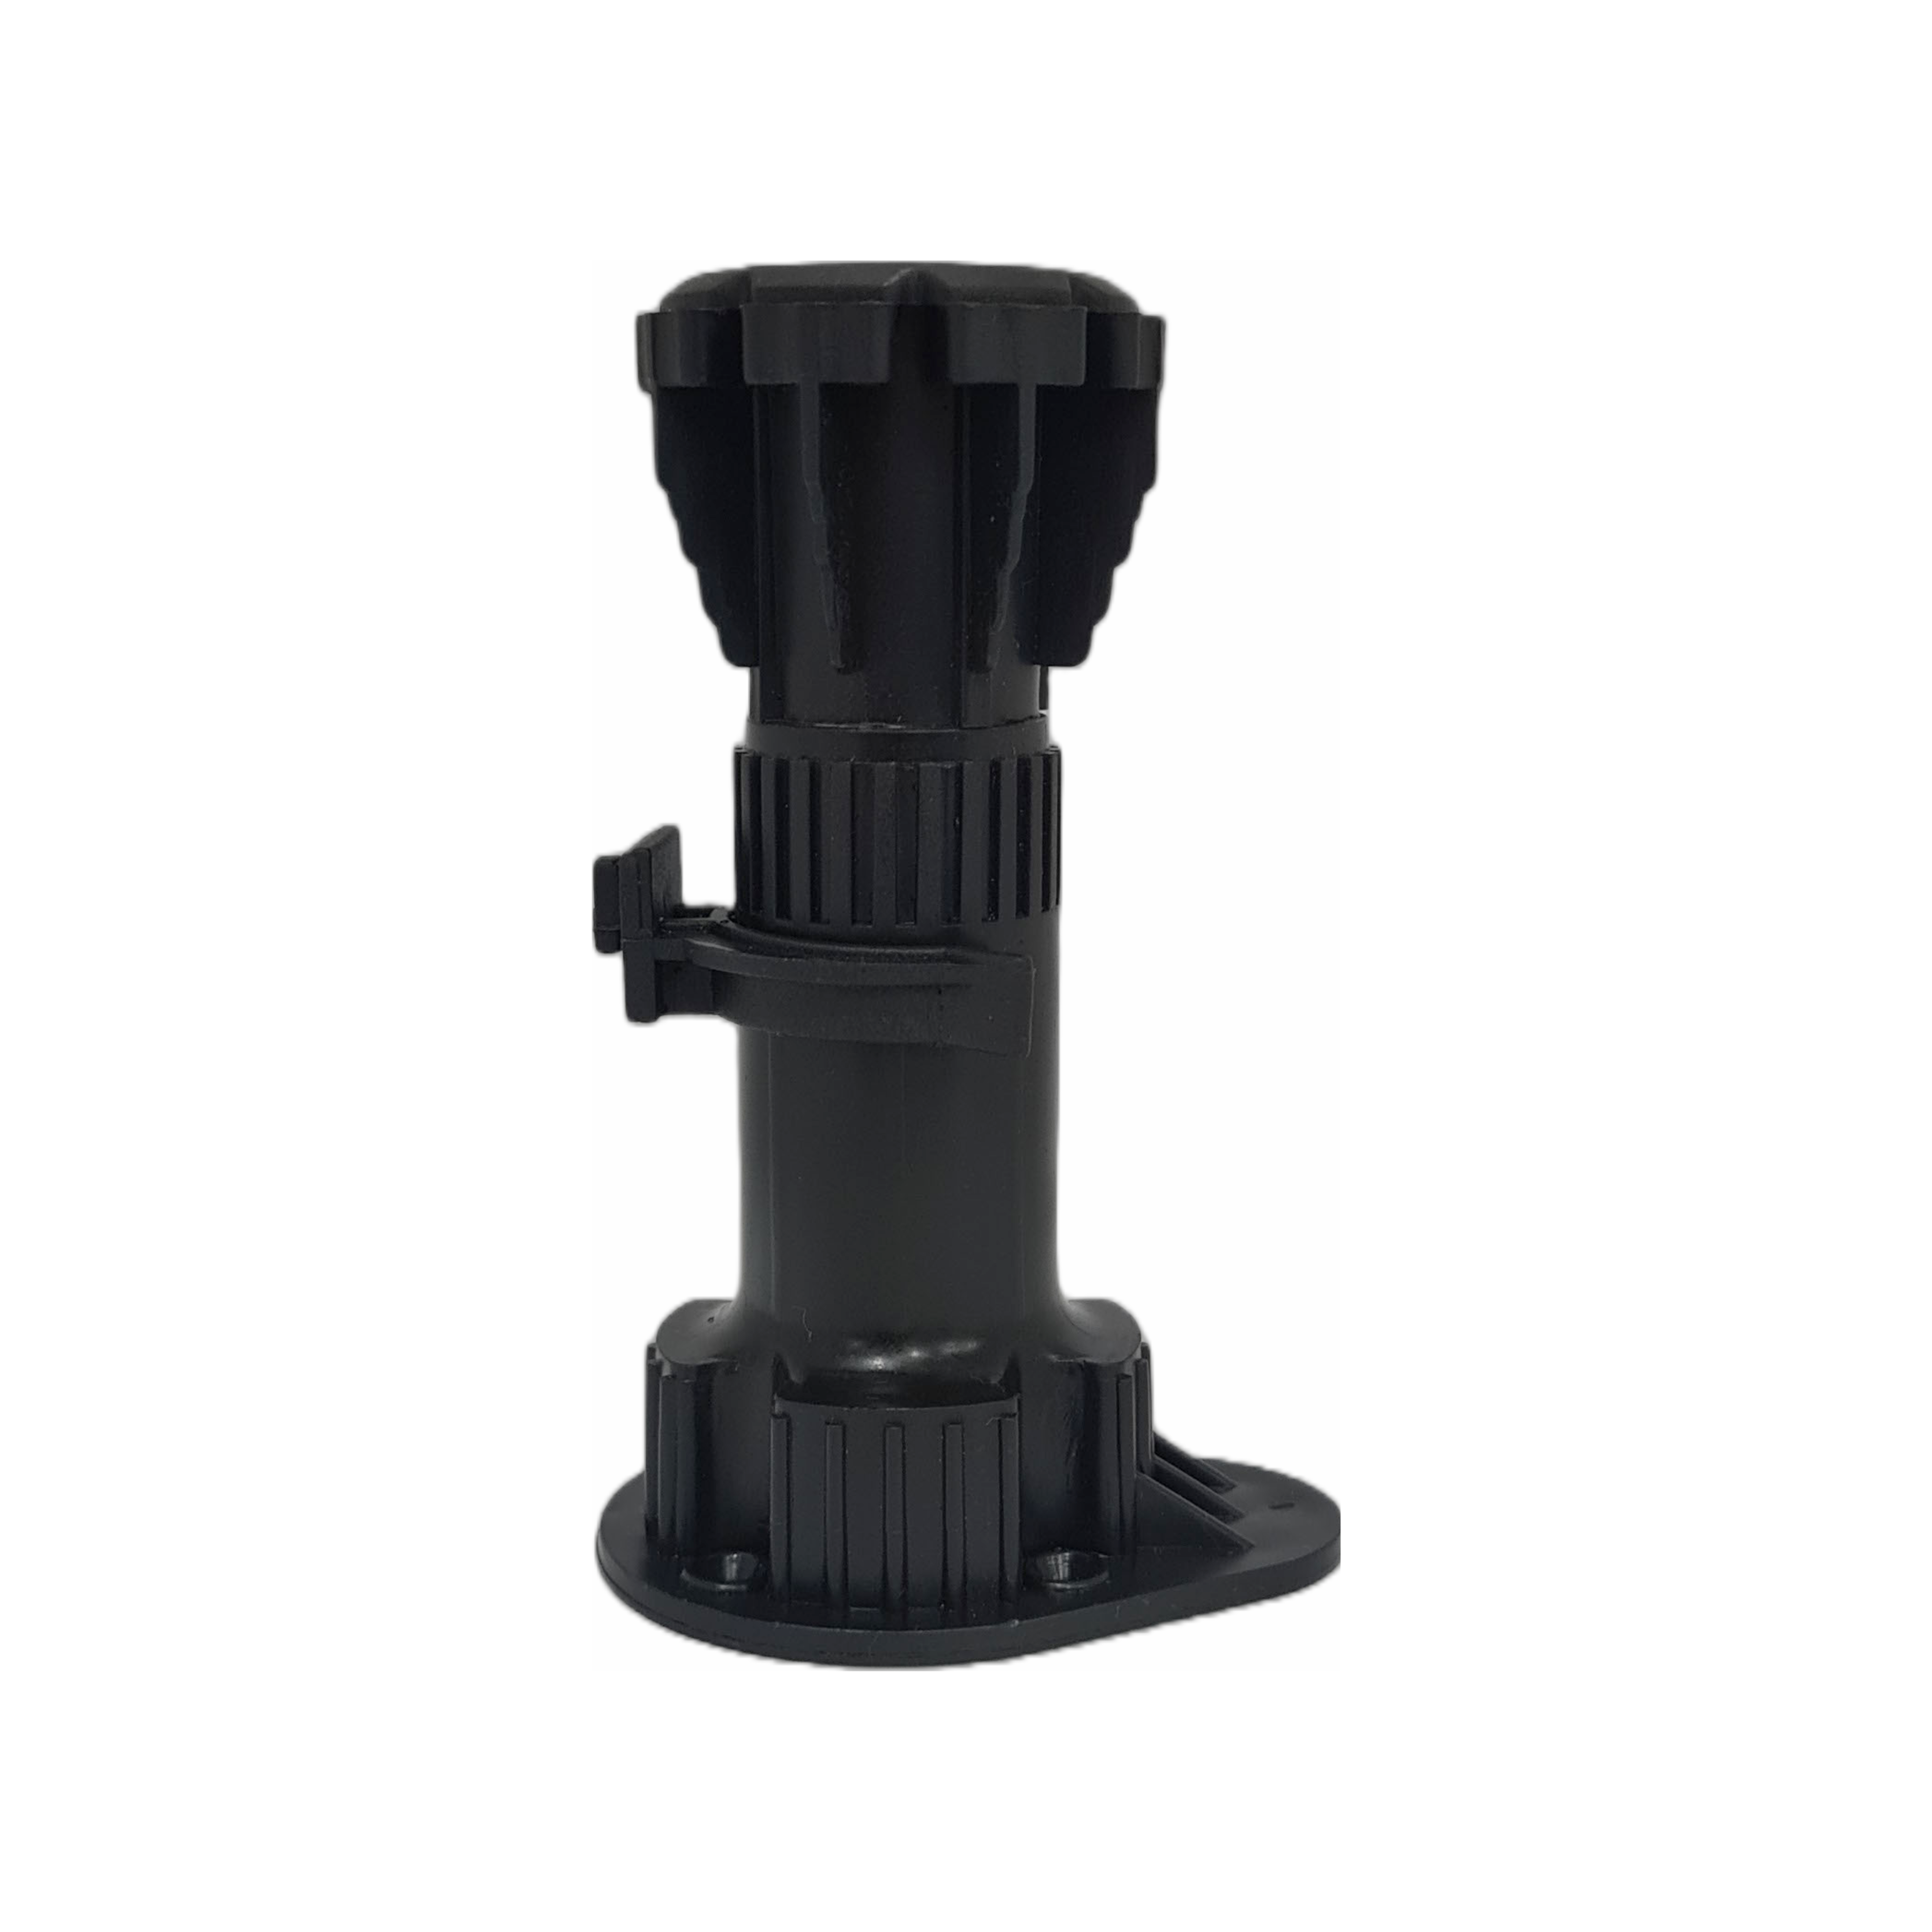 Special Size - Adjustable Plastic Leg (100 MM expandable to 140 MM) - high strength and durable with shock resistance